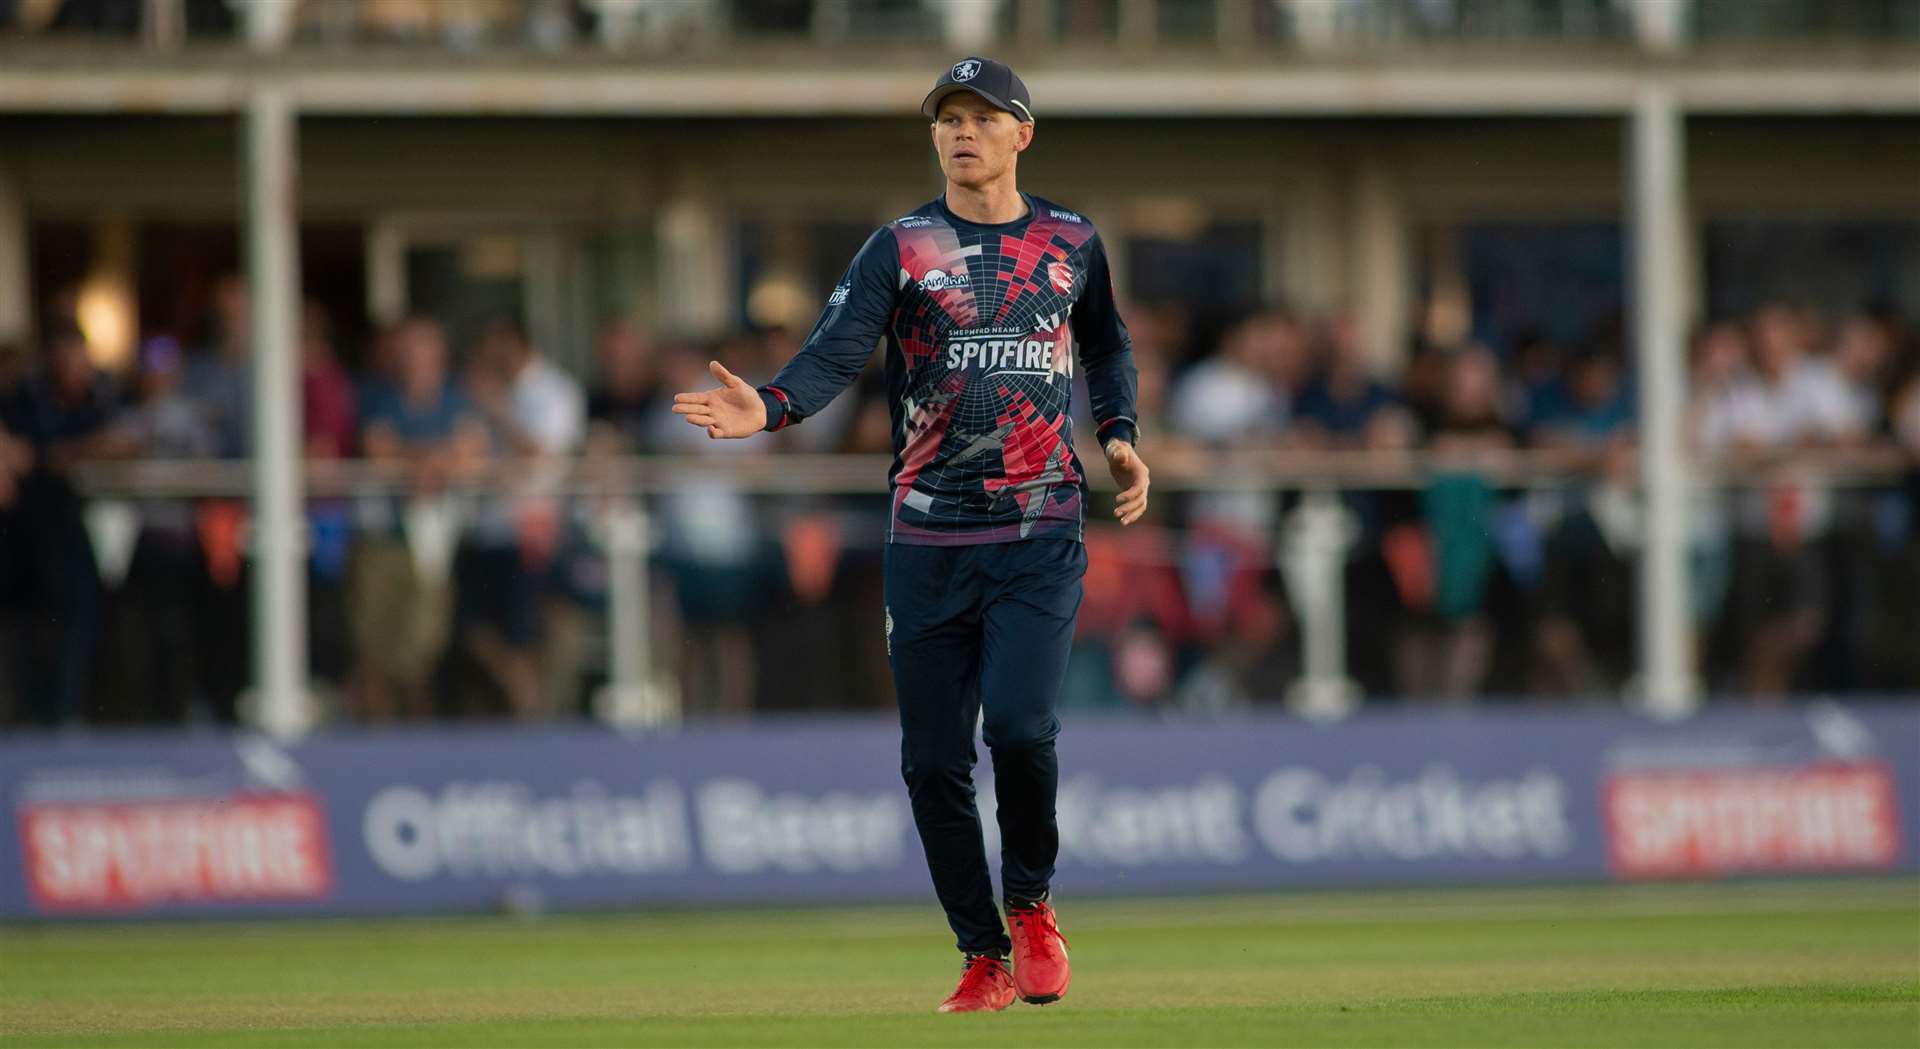 Kent skipper Sam Billings was selected by the Oval Invincibles in the second round of the inaugural player draft for The Hundred